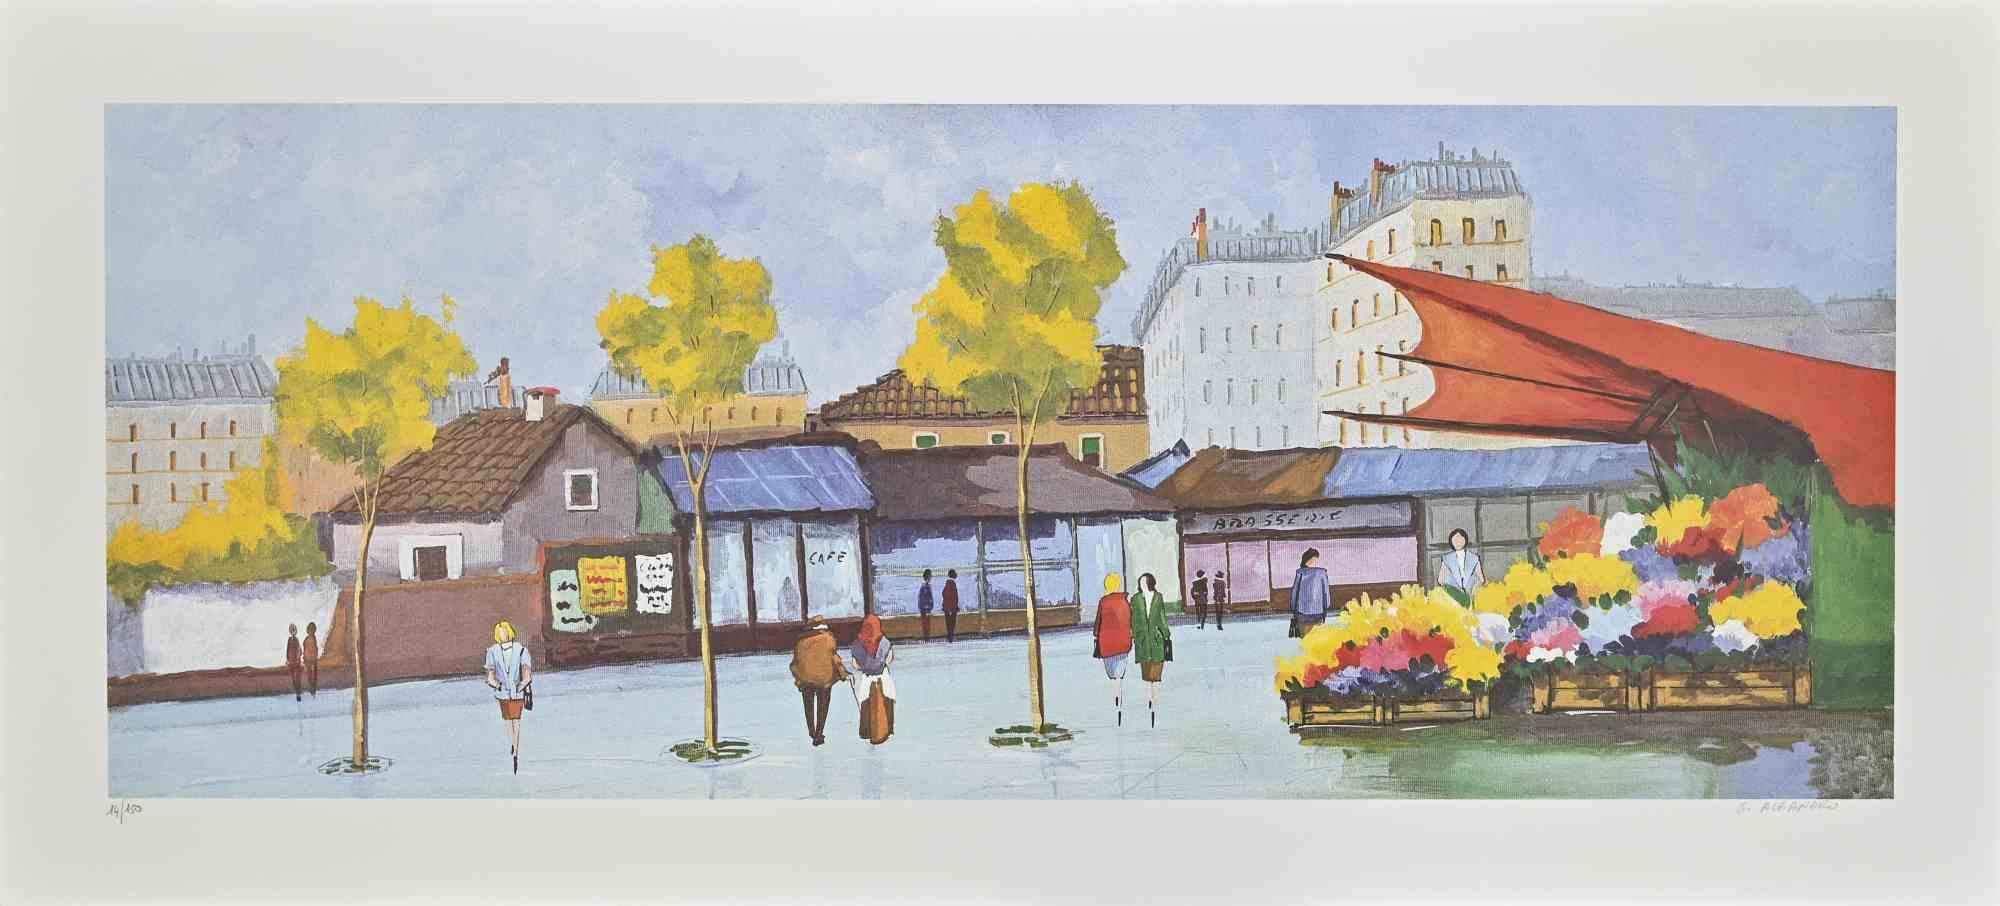 The City is an artwork realized in the 1980s by Giuseppe Aleandro

Hand signed and numbered on the lower margin.

Mixed colored serigraph.

Edition of 14/150 prints.